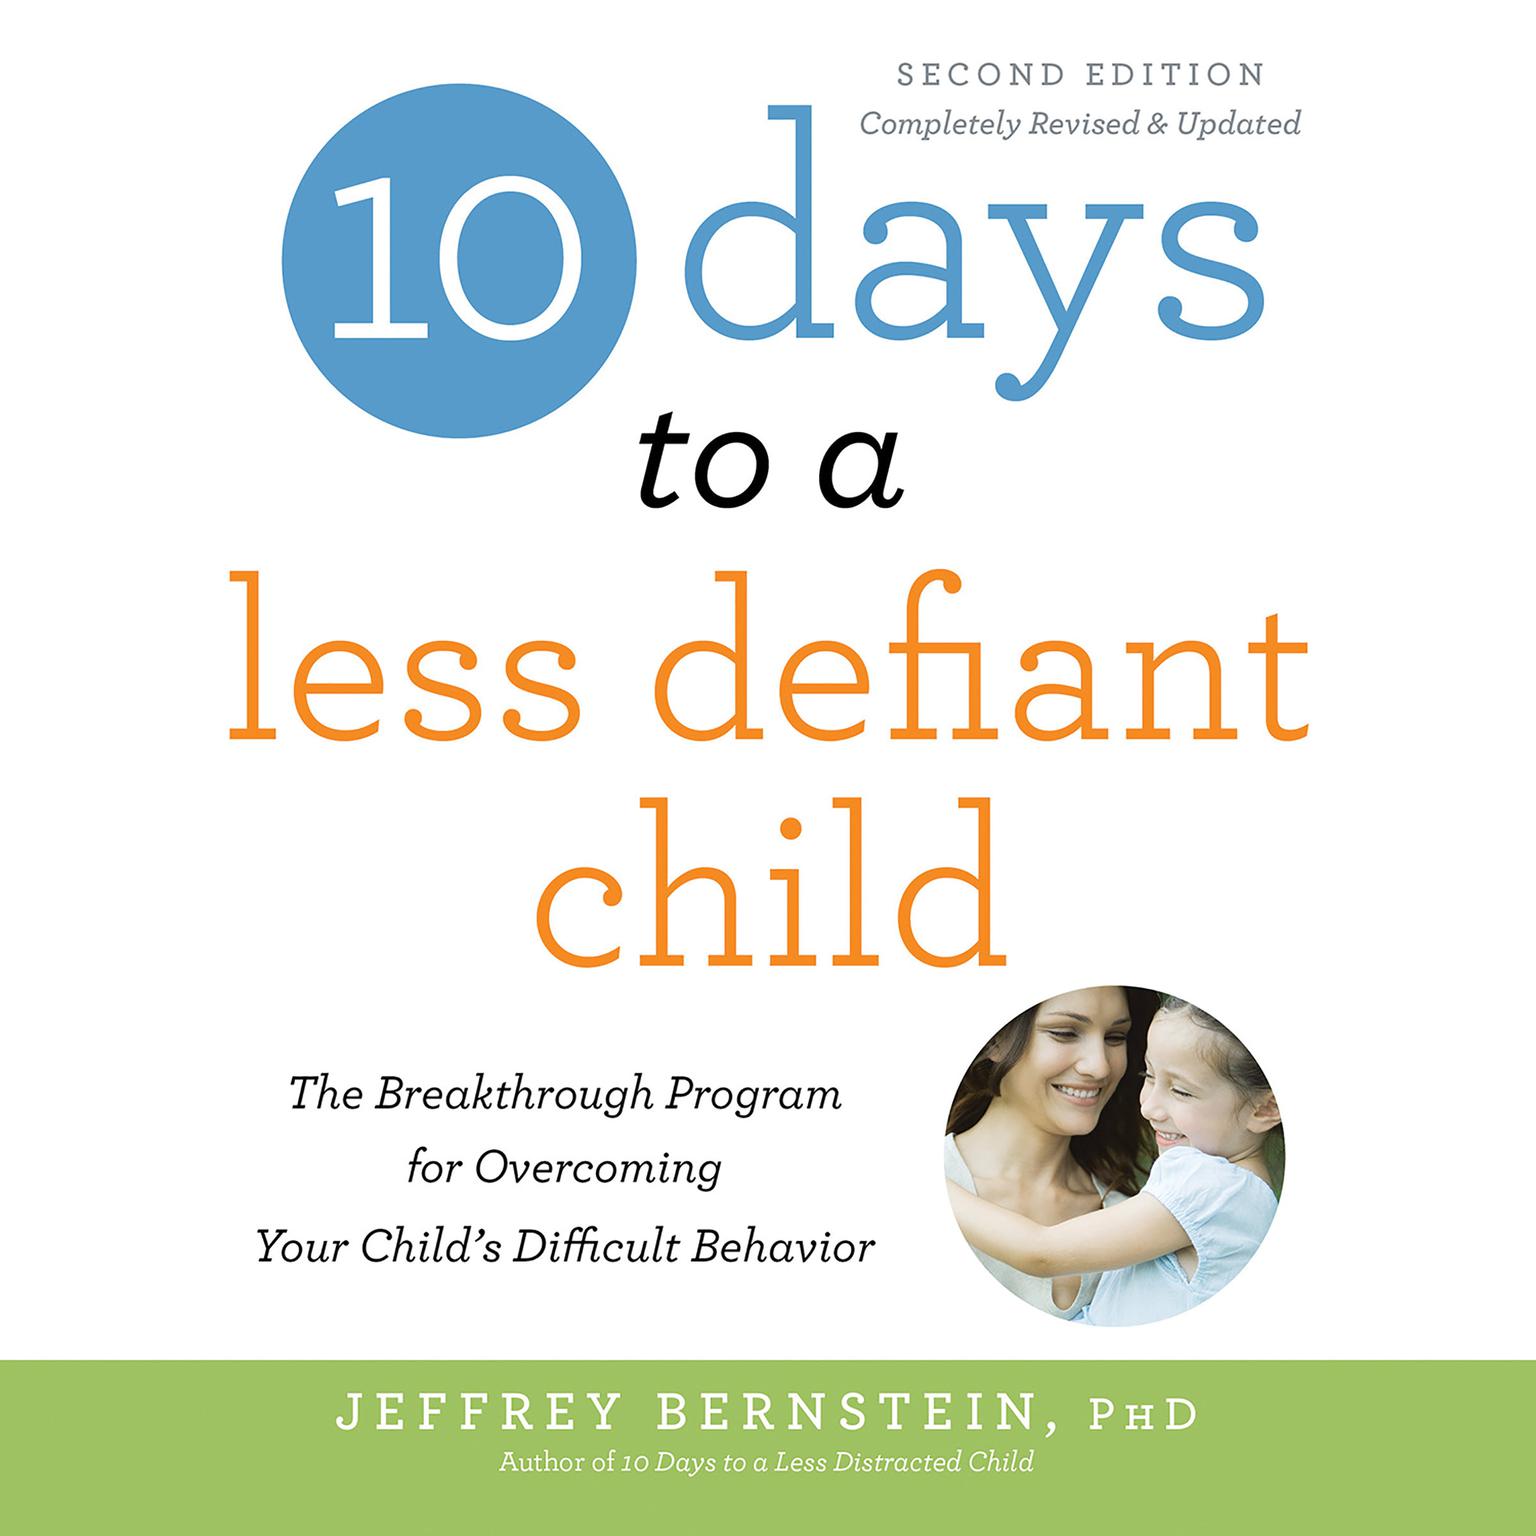 10 Days to a Less Defiant Child, second edition: The Breakthrough Program for Overcoming Your Childs Difficult Behavior Audiobook, by Jeffrey Bernstein